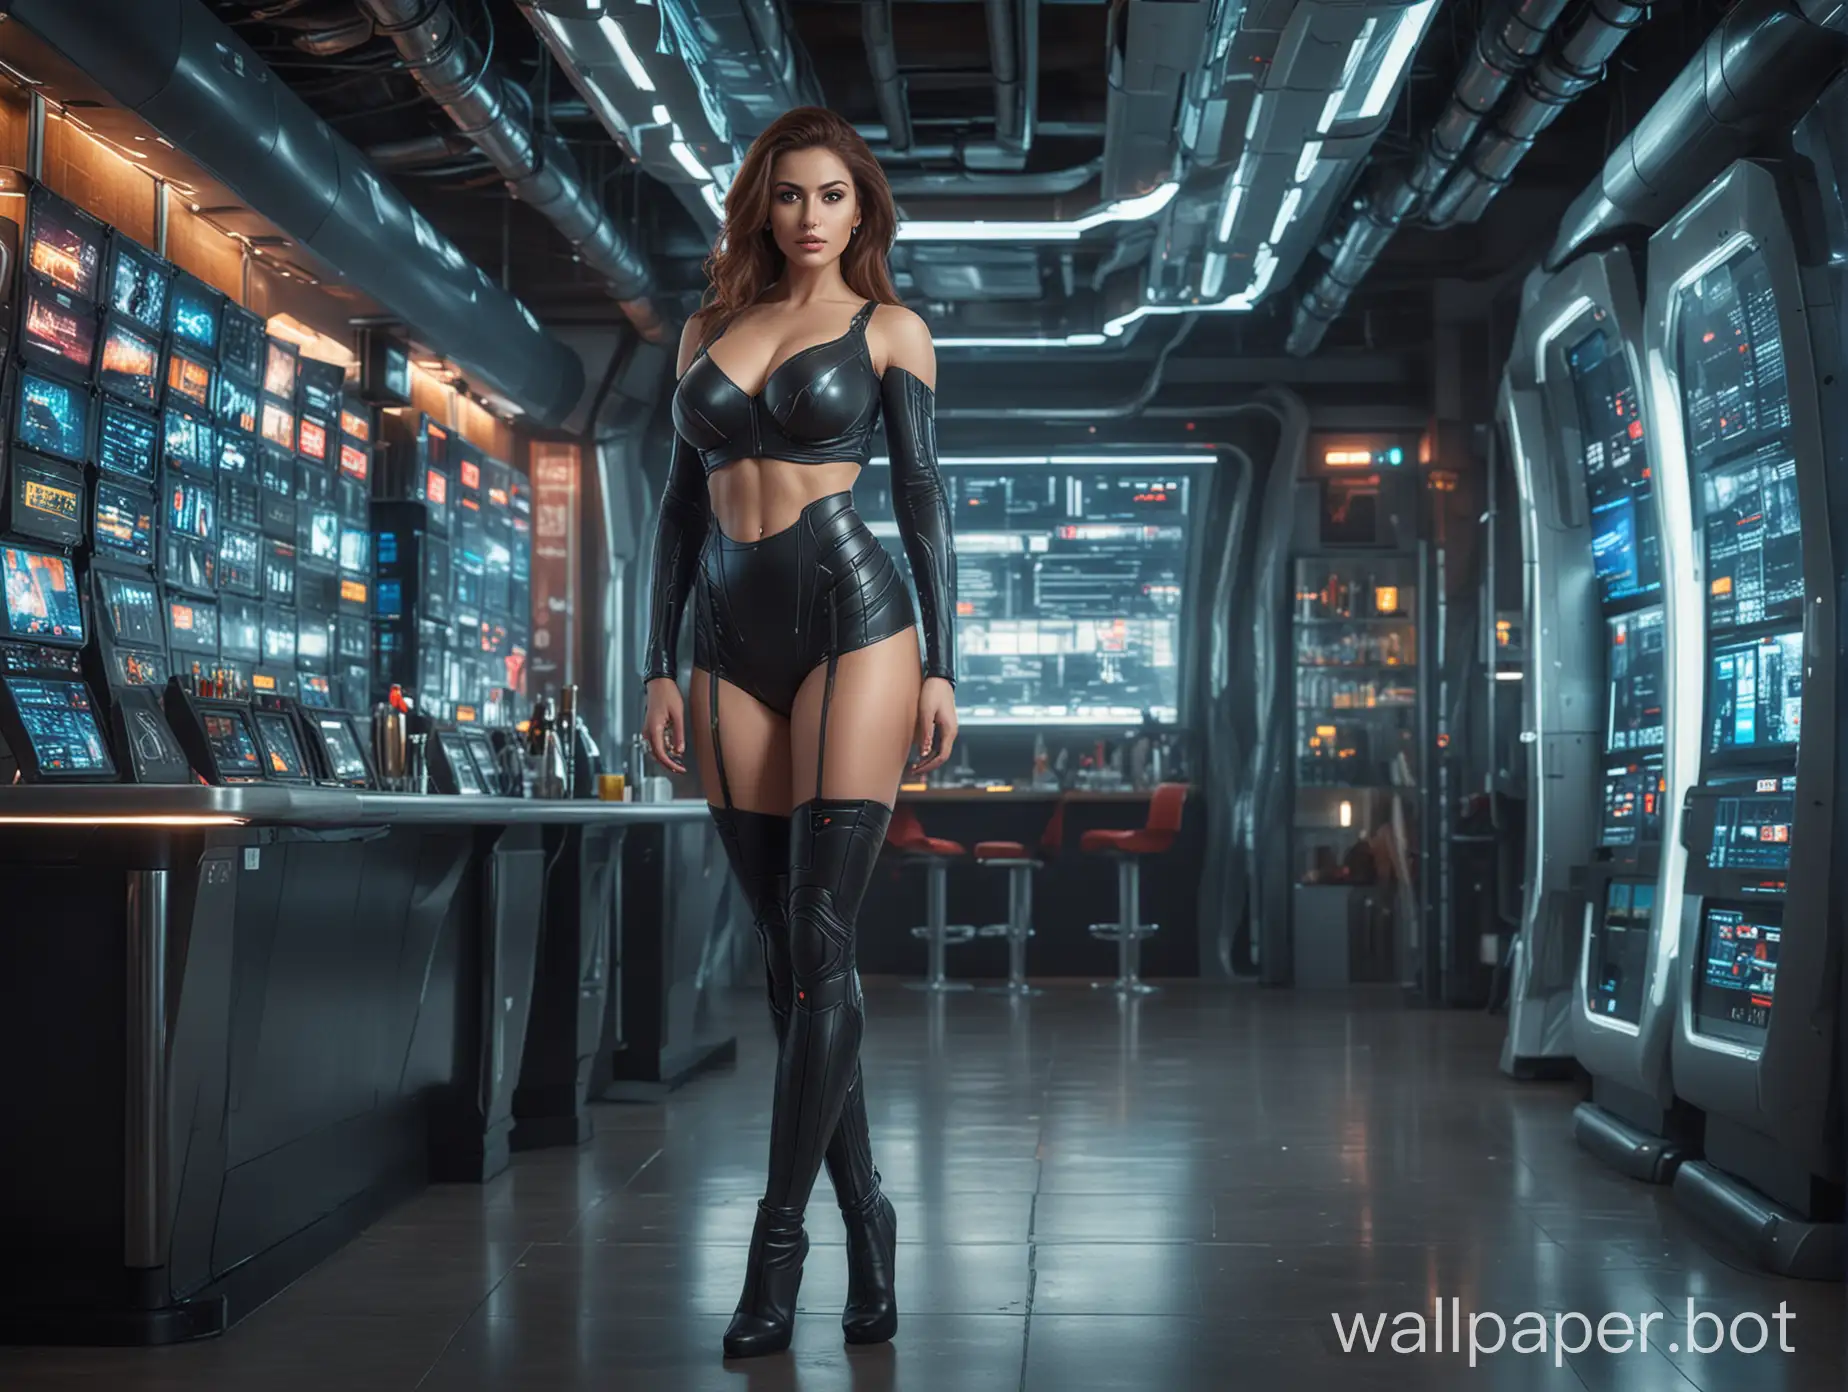 beautiful woman, with triple size large breasts, full length body view, in front of a futuristic business, in the genre of science fiction, standing in a high tech bar with beautiful legs wearing a tight outfit